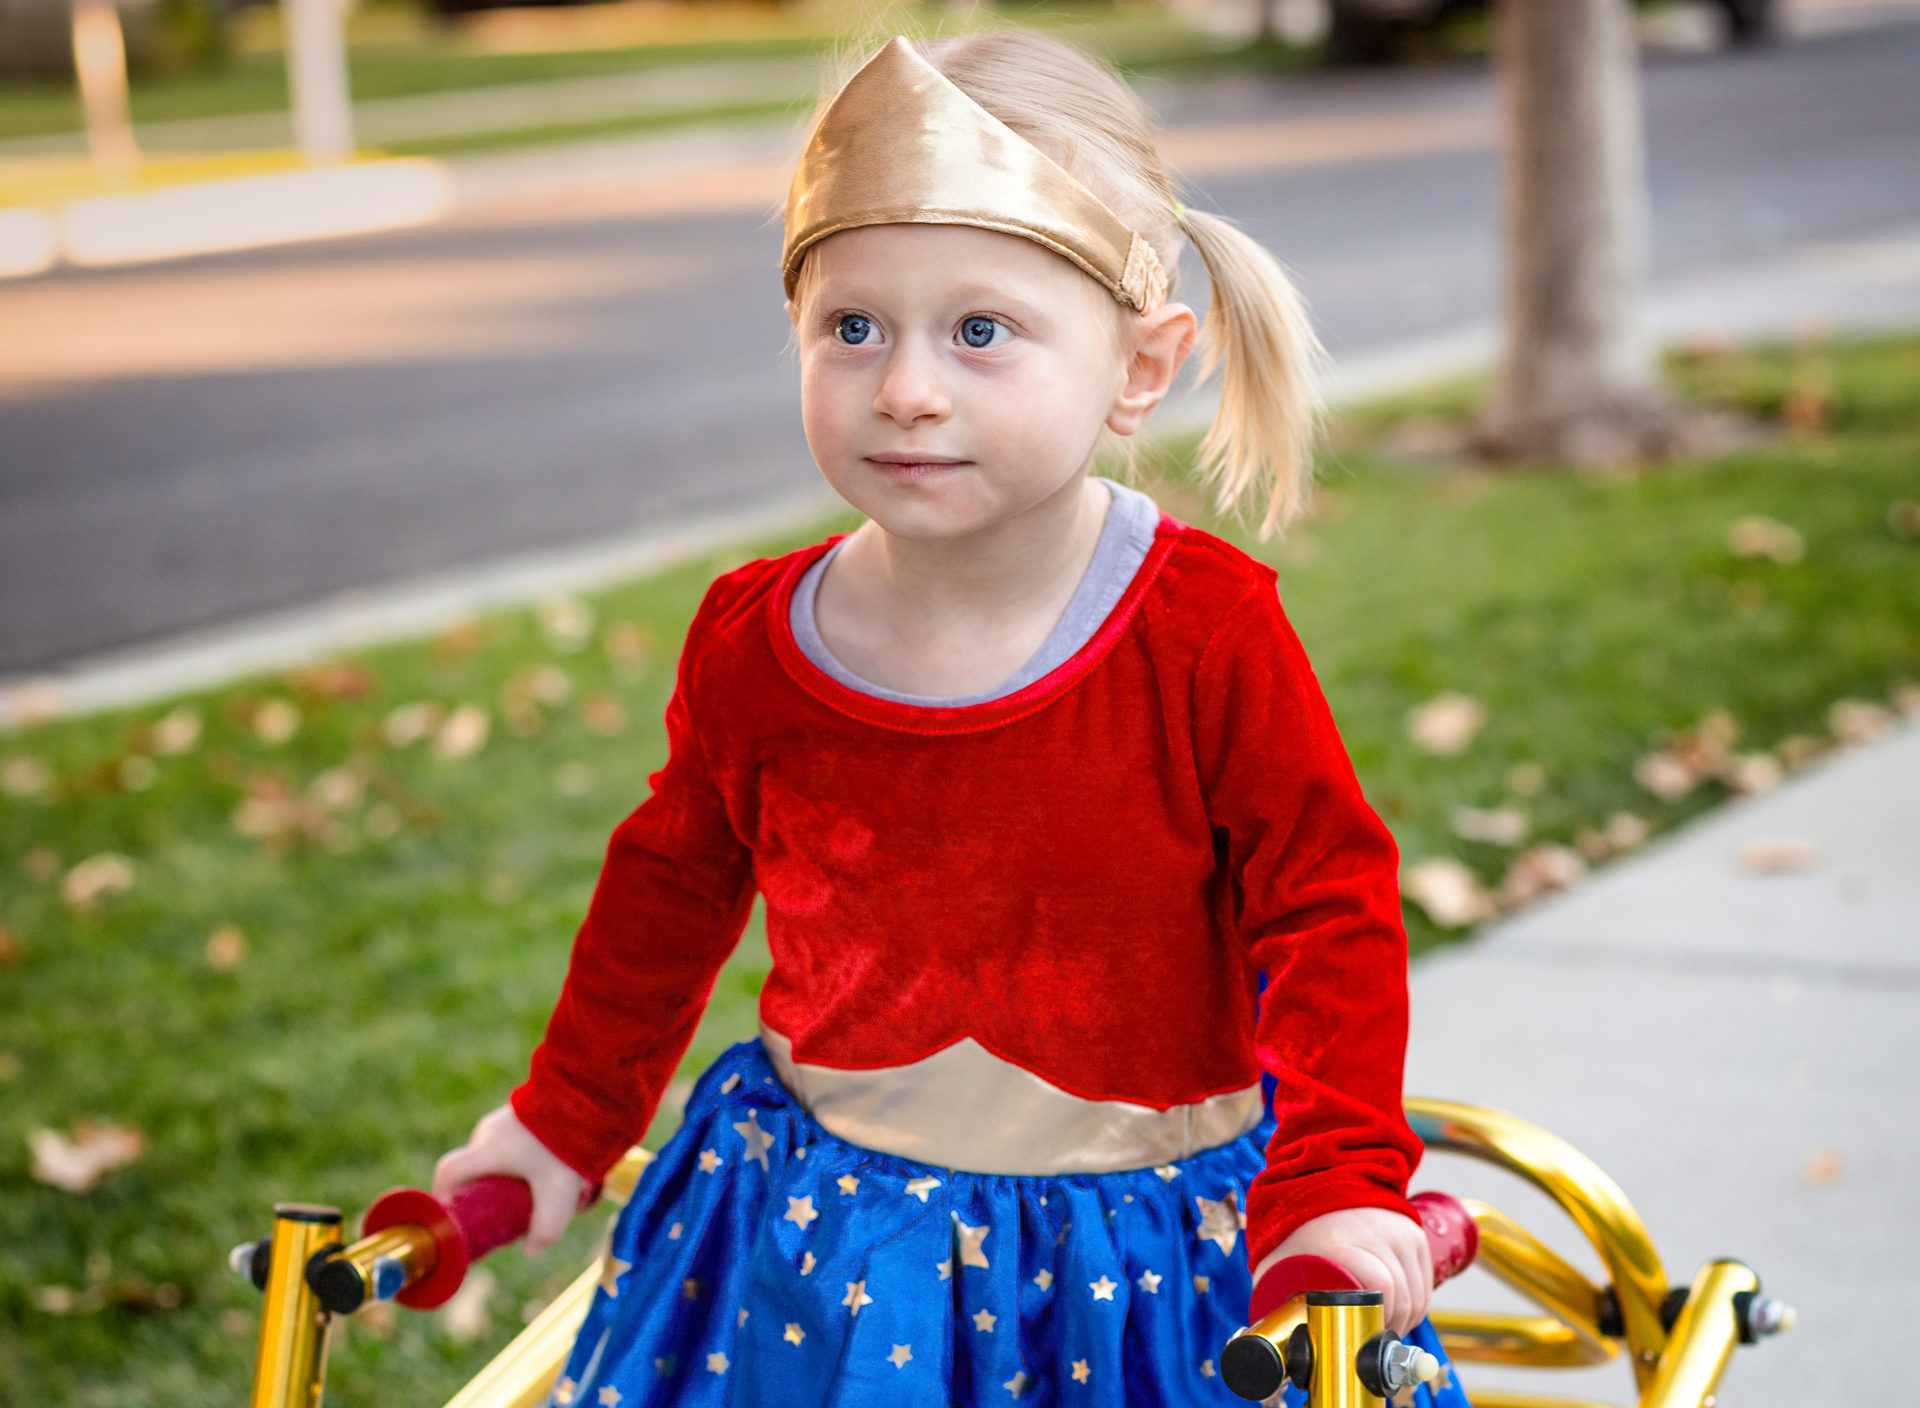 Tips to Support Families Impacted by Disability This Halloween